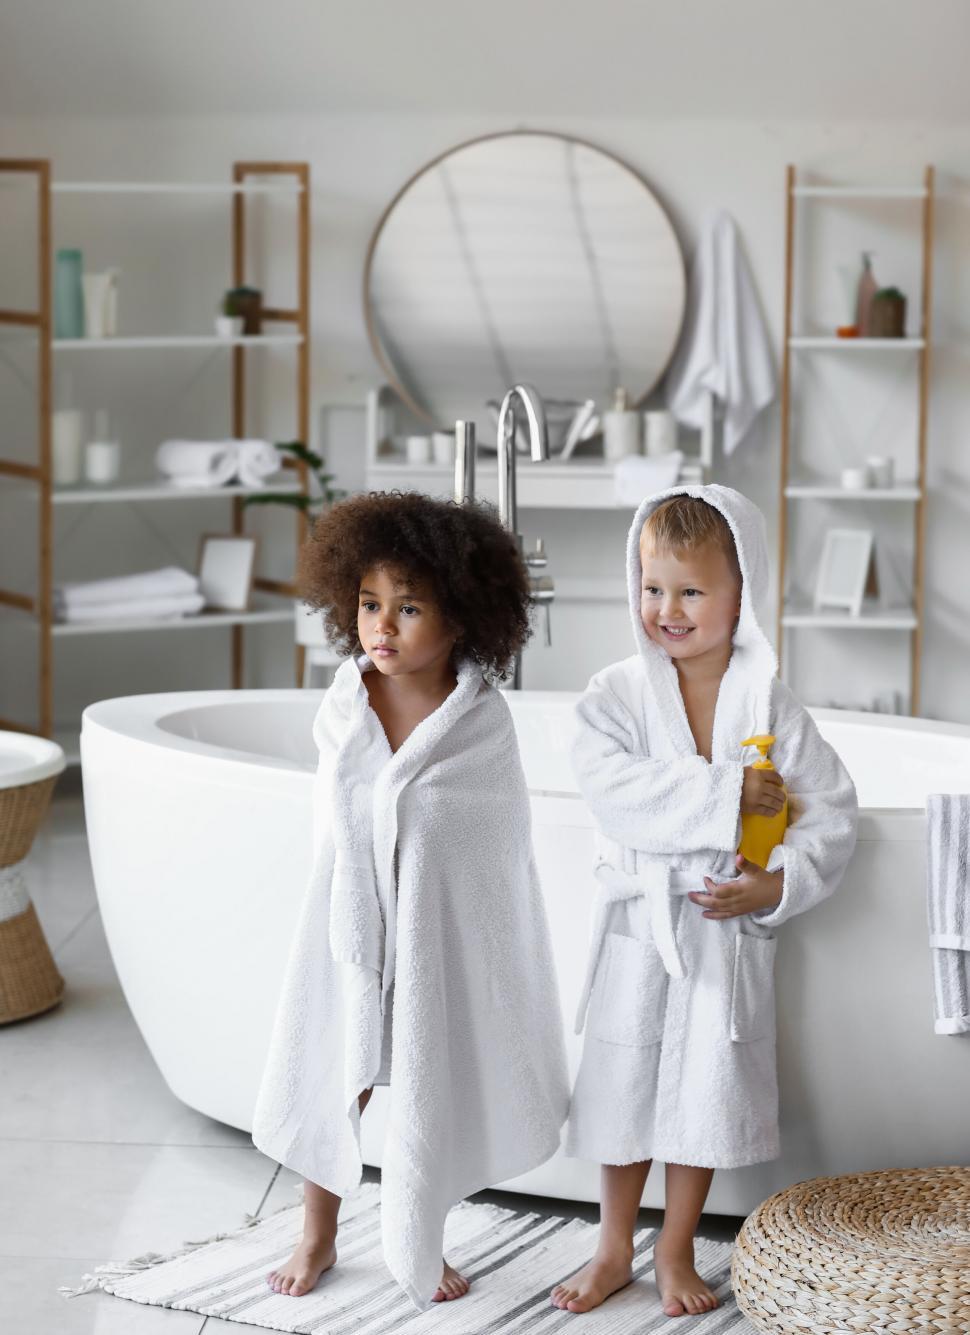 Free Image of Two children in bathrobes in bathroom 